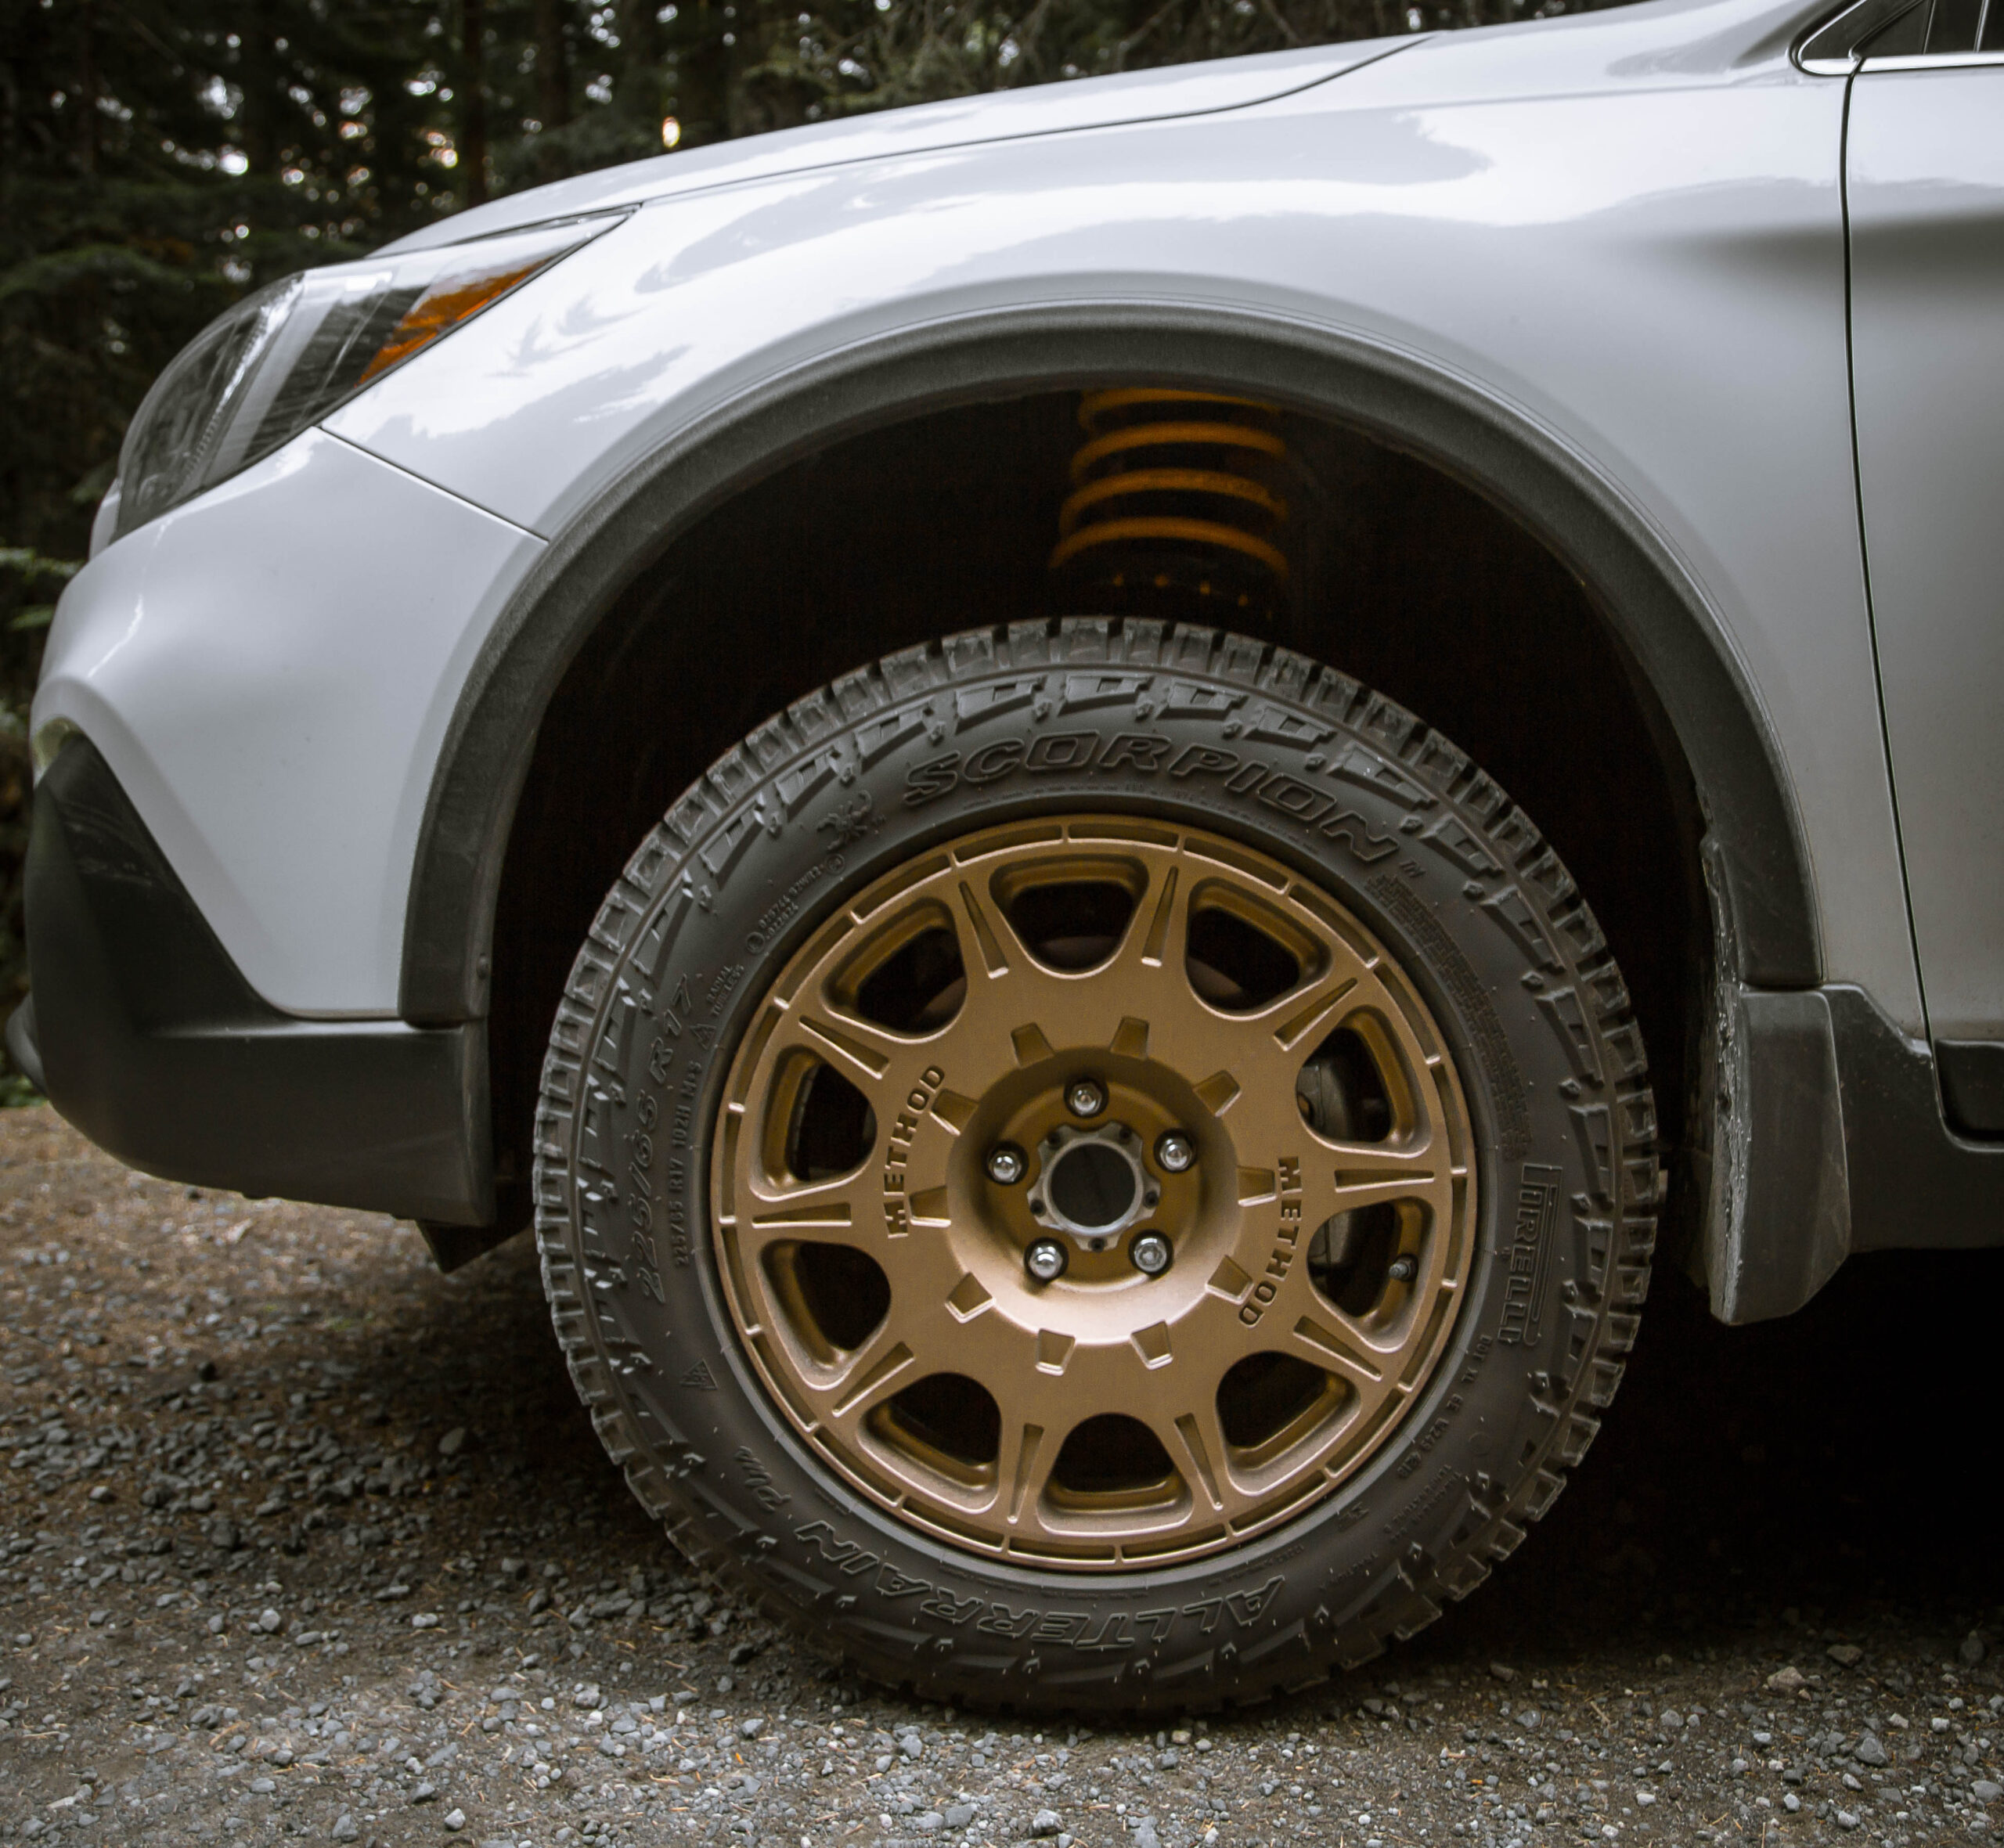 Pirelli Scorpion All terrain plus snow rated tire on a lifted subaru outback 2018